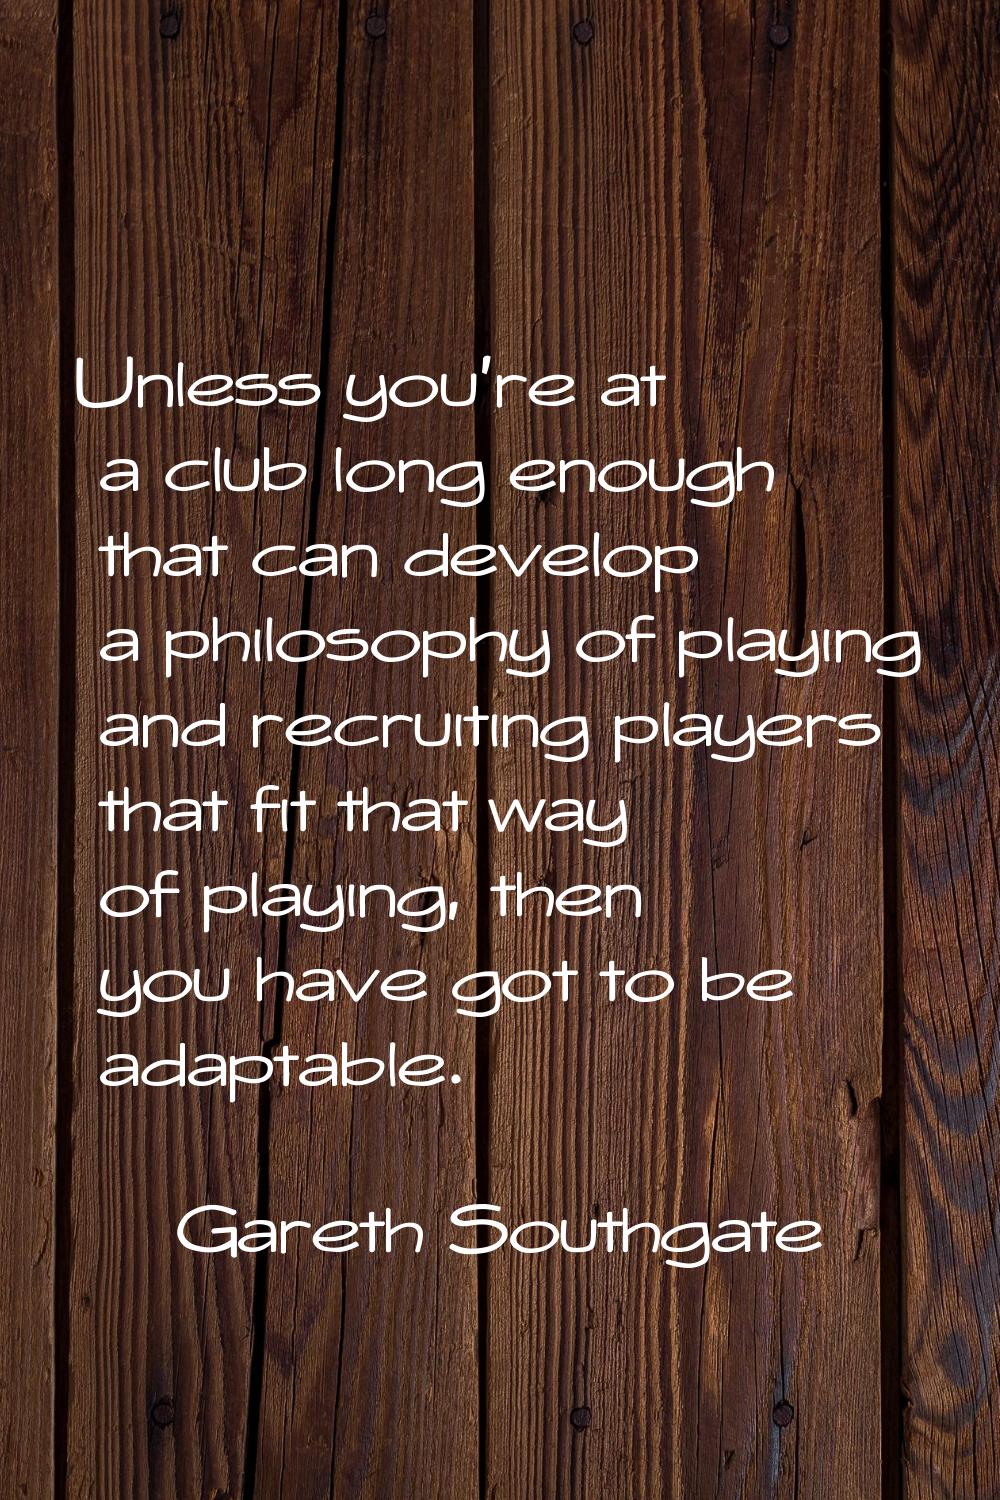 Unless you're at a club long enough that can develop a philosophy of playing and recruiting players